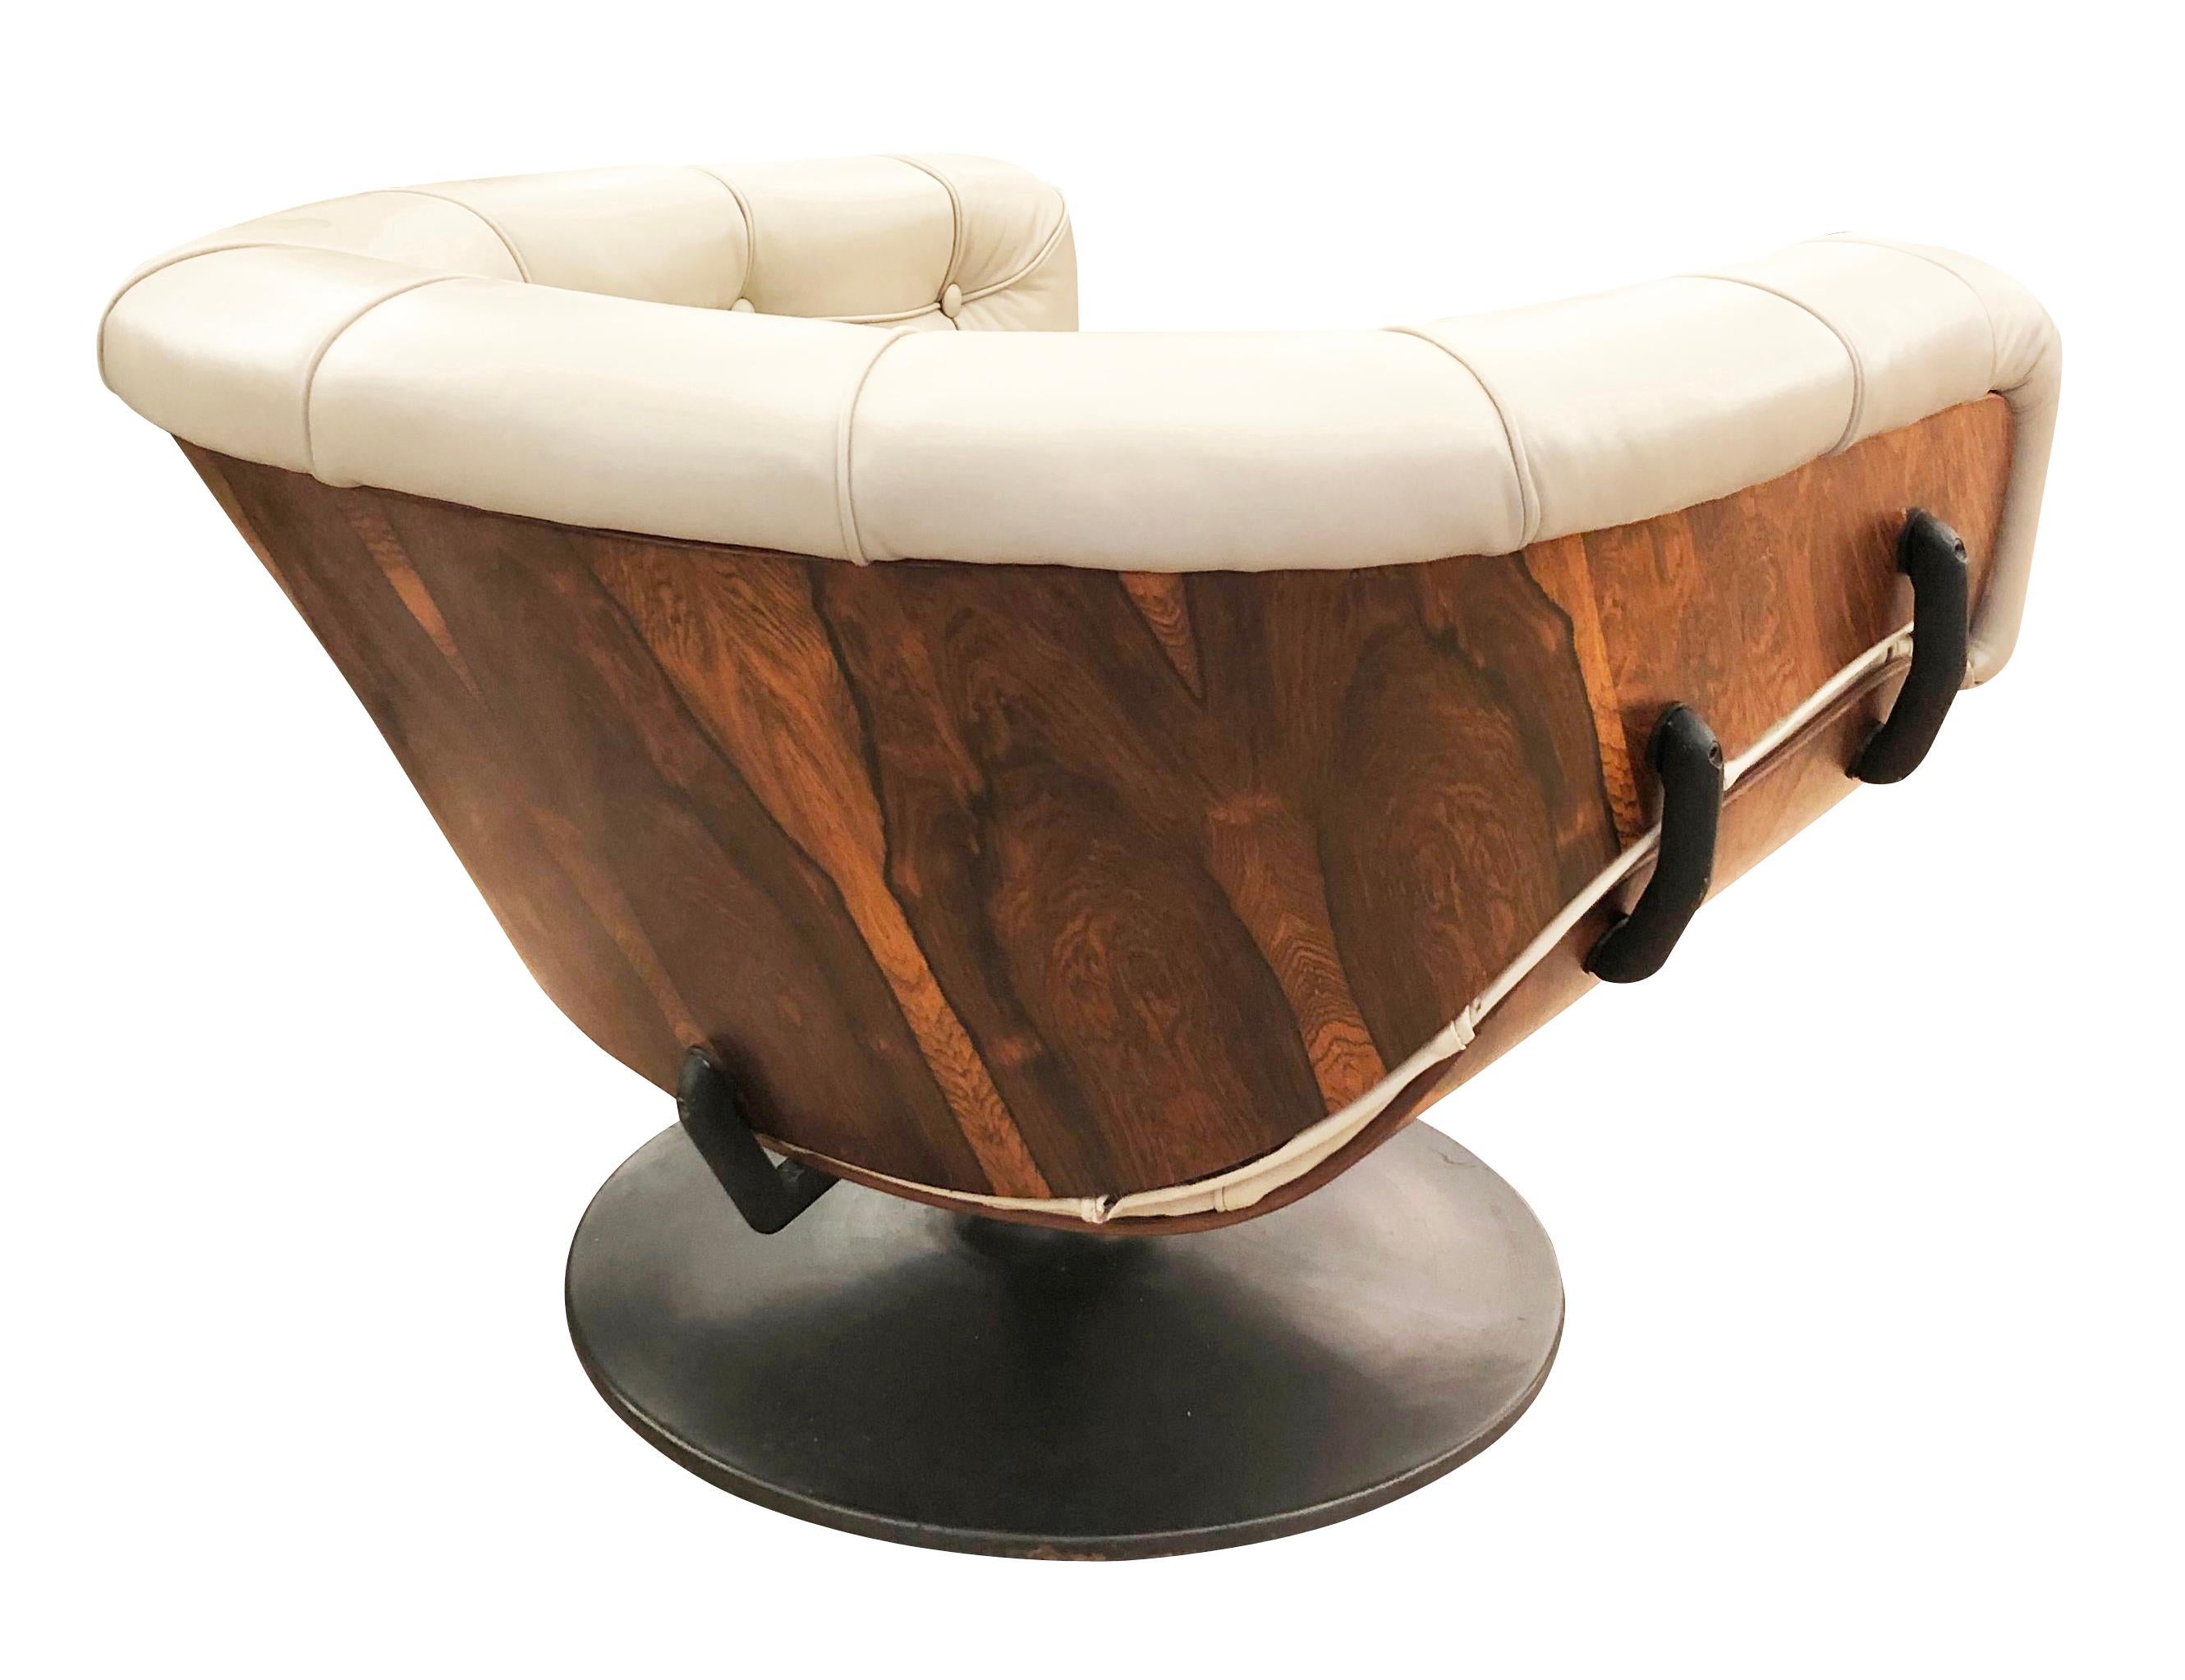 Iconic lounge chair designed by English designer, Martin Grierson, for Italian seating manufacturer, Artflex. This piece was ahead of its time with a bold modern look defined by its rosewood shell and tufted leather. The swiveling pedestal is